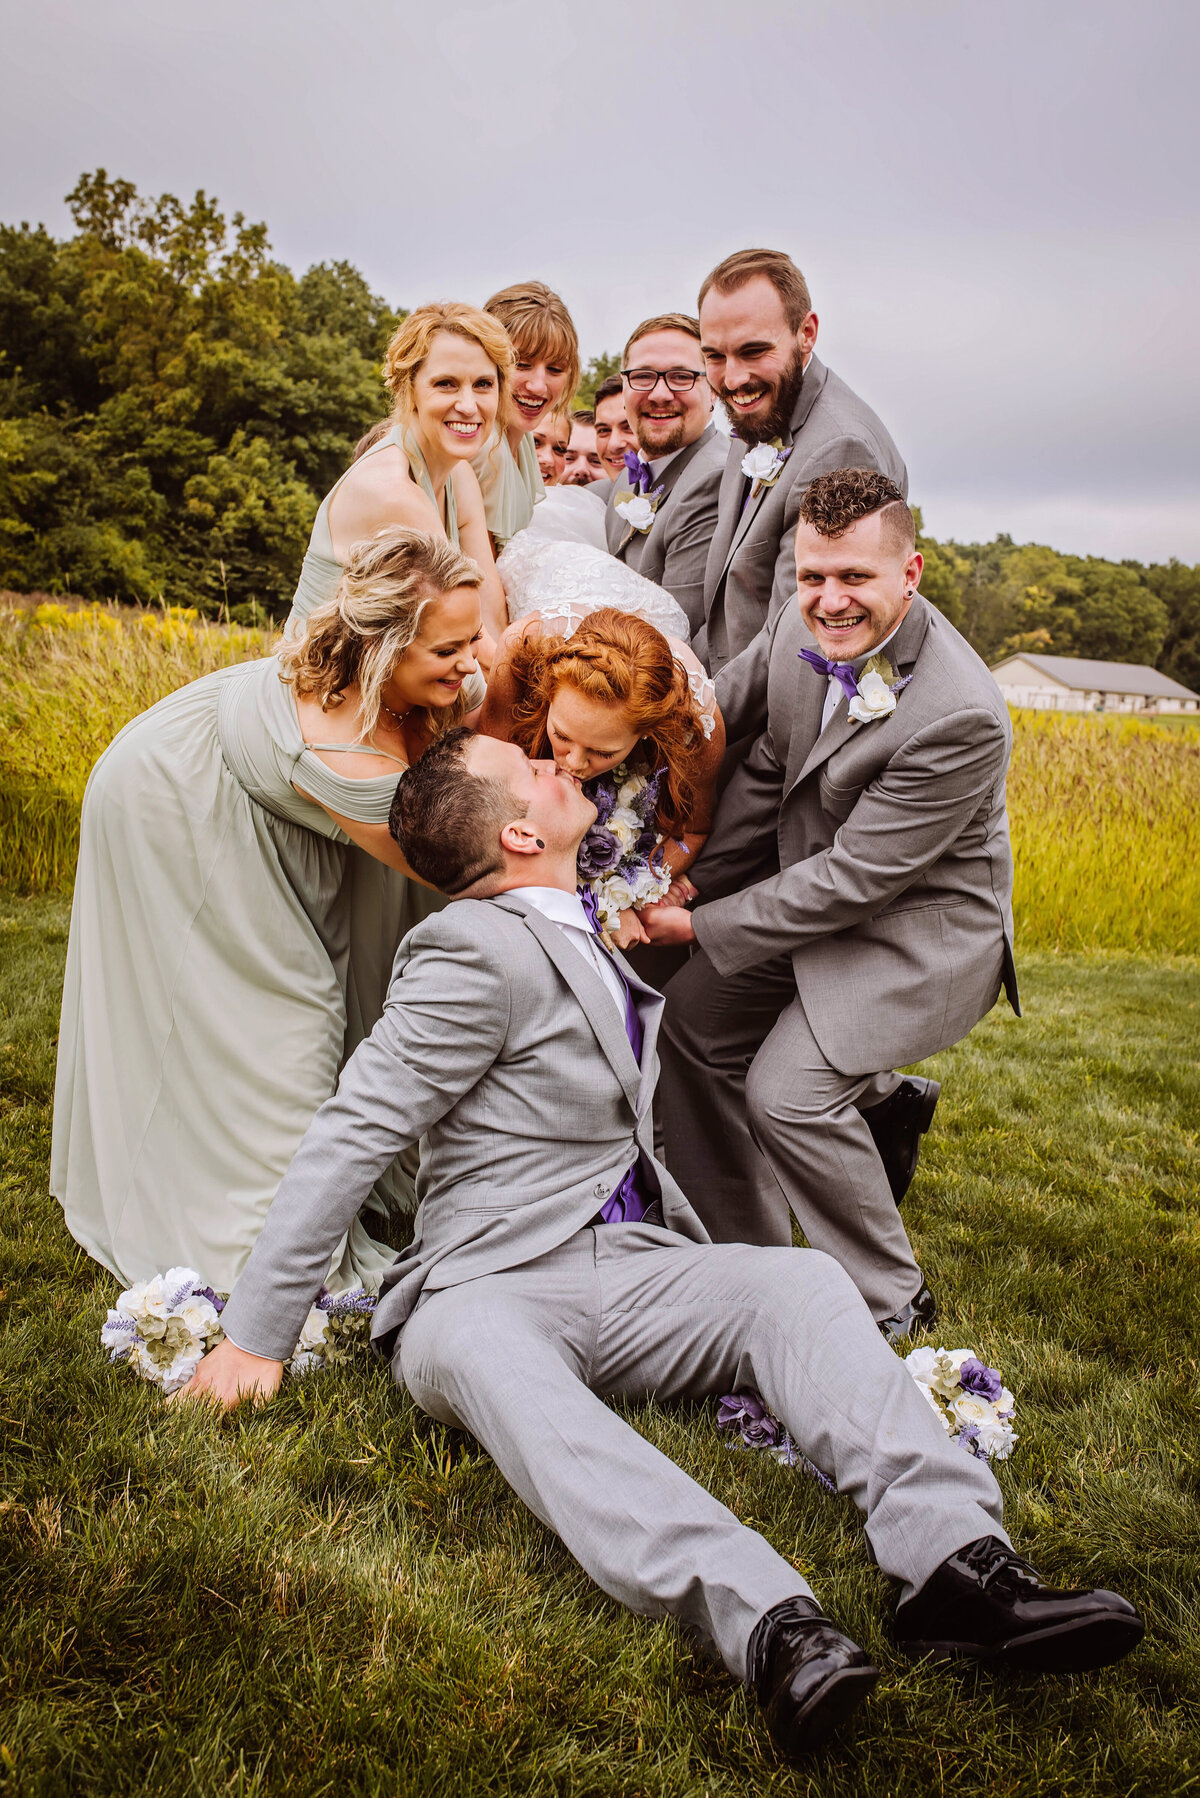 wedding party poses must have